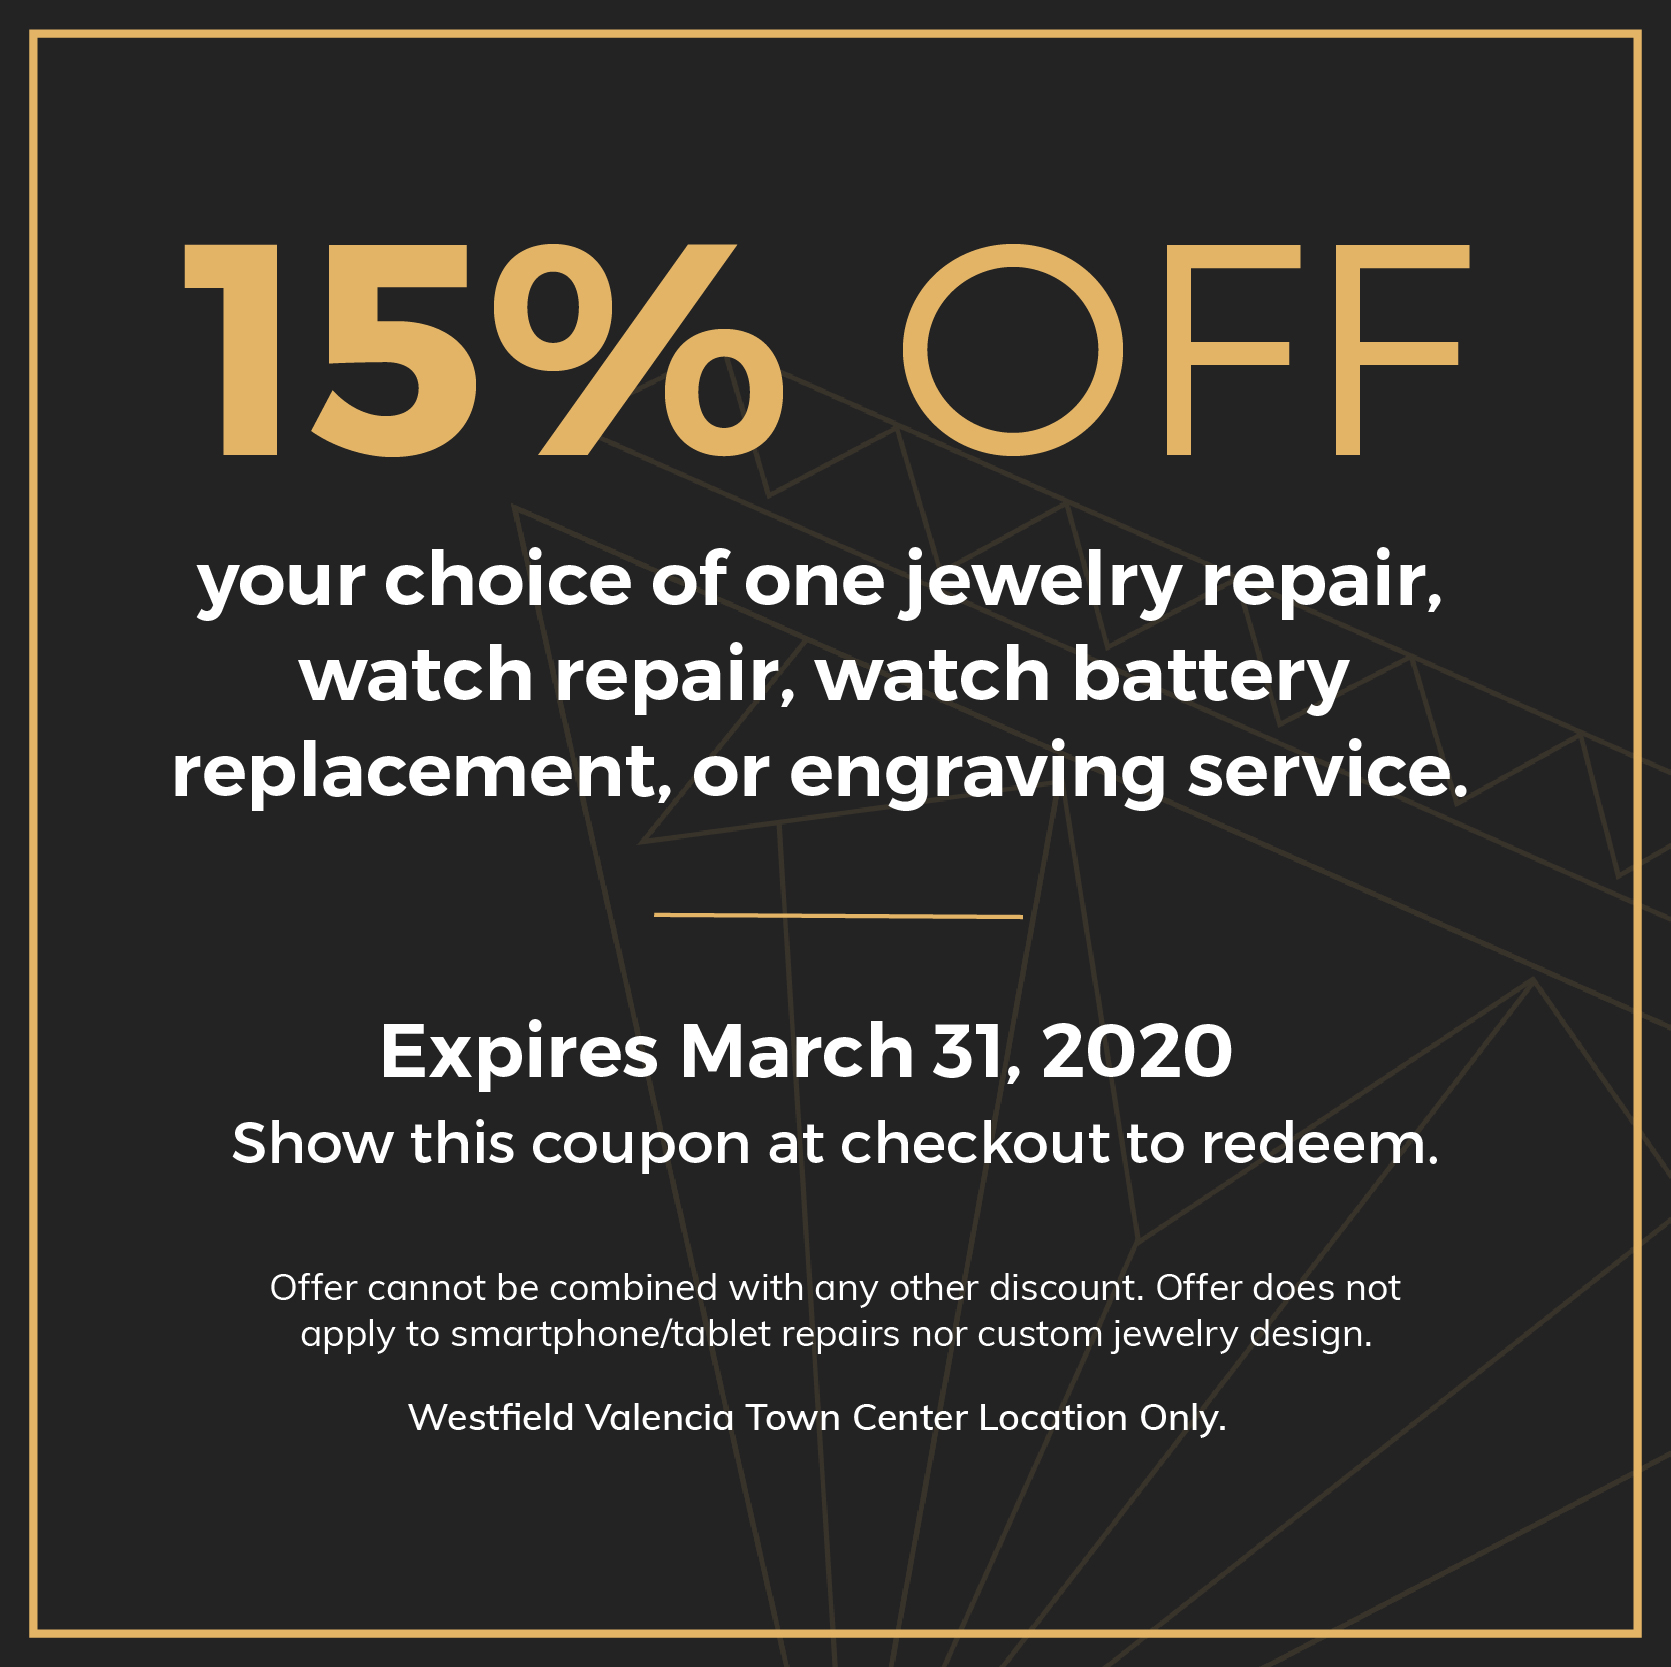 15% OFF. your choice of one jewelry repair, watch repair, watch battery replacement, or engraving service. Expires March 31, 2020. Show this coupon at checkout to redeem. Offer cannot be combined with any other discount. Offer does not apply to smartphone/tablet repairs nor custom jewelry design. Westfield Valencia Town Center Location Only.